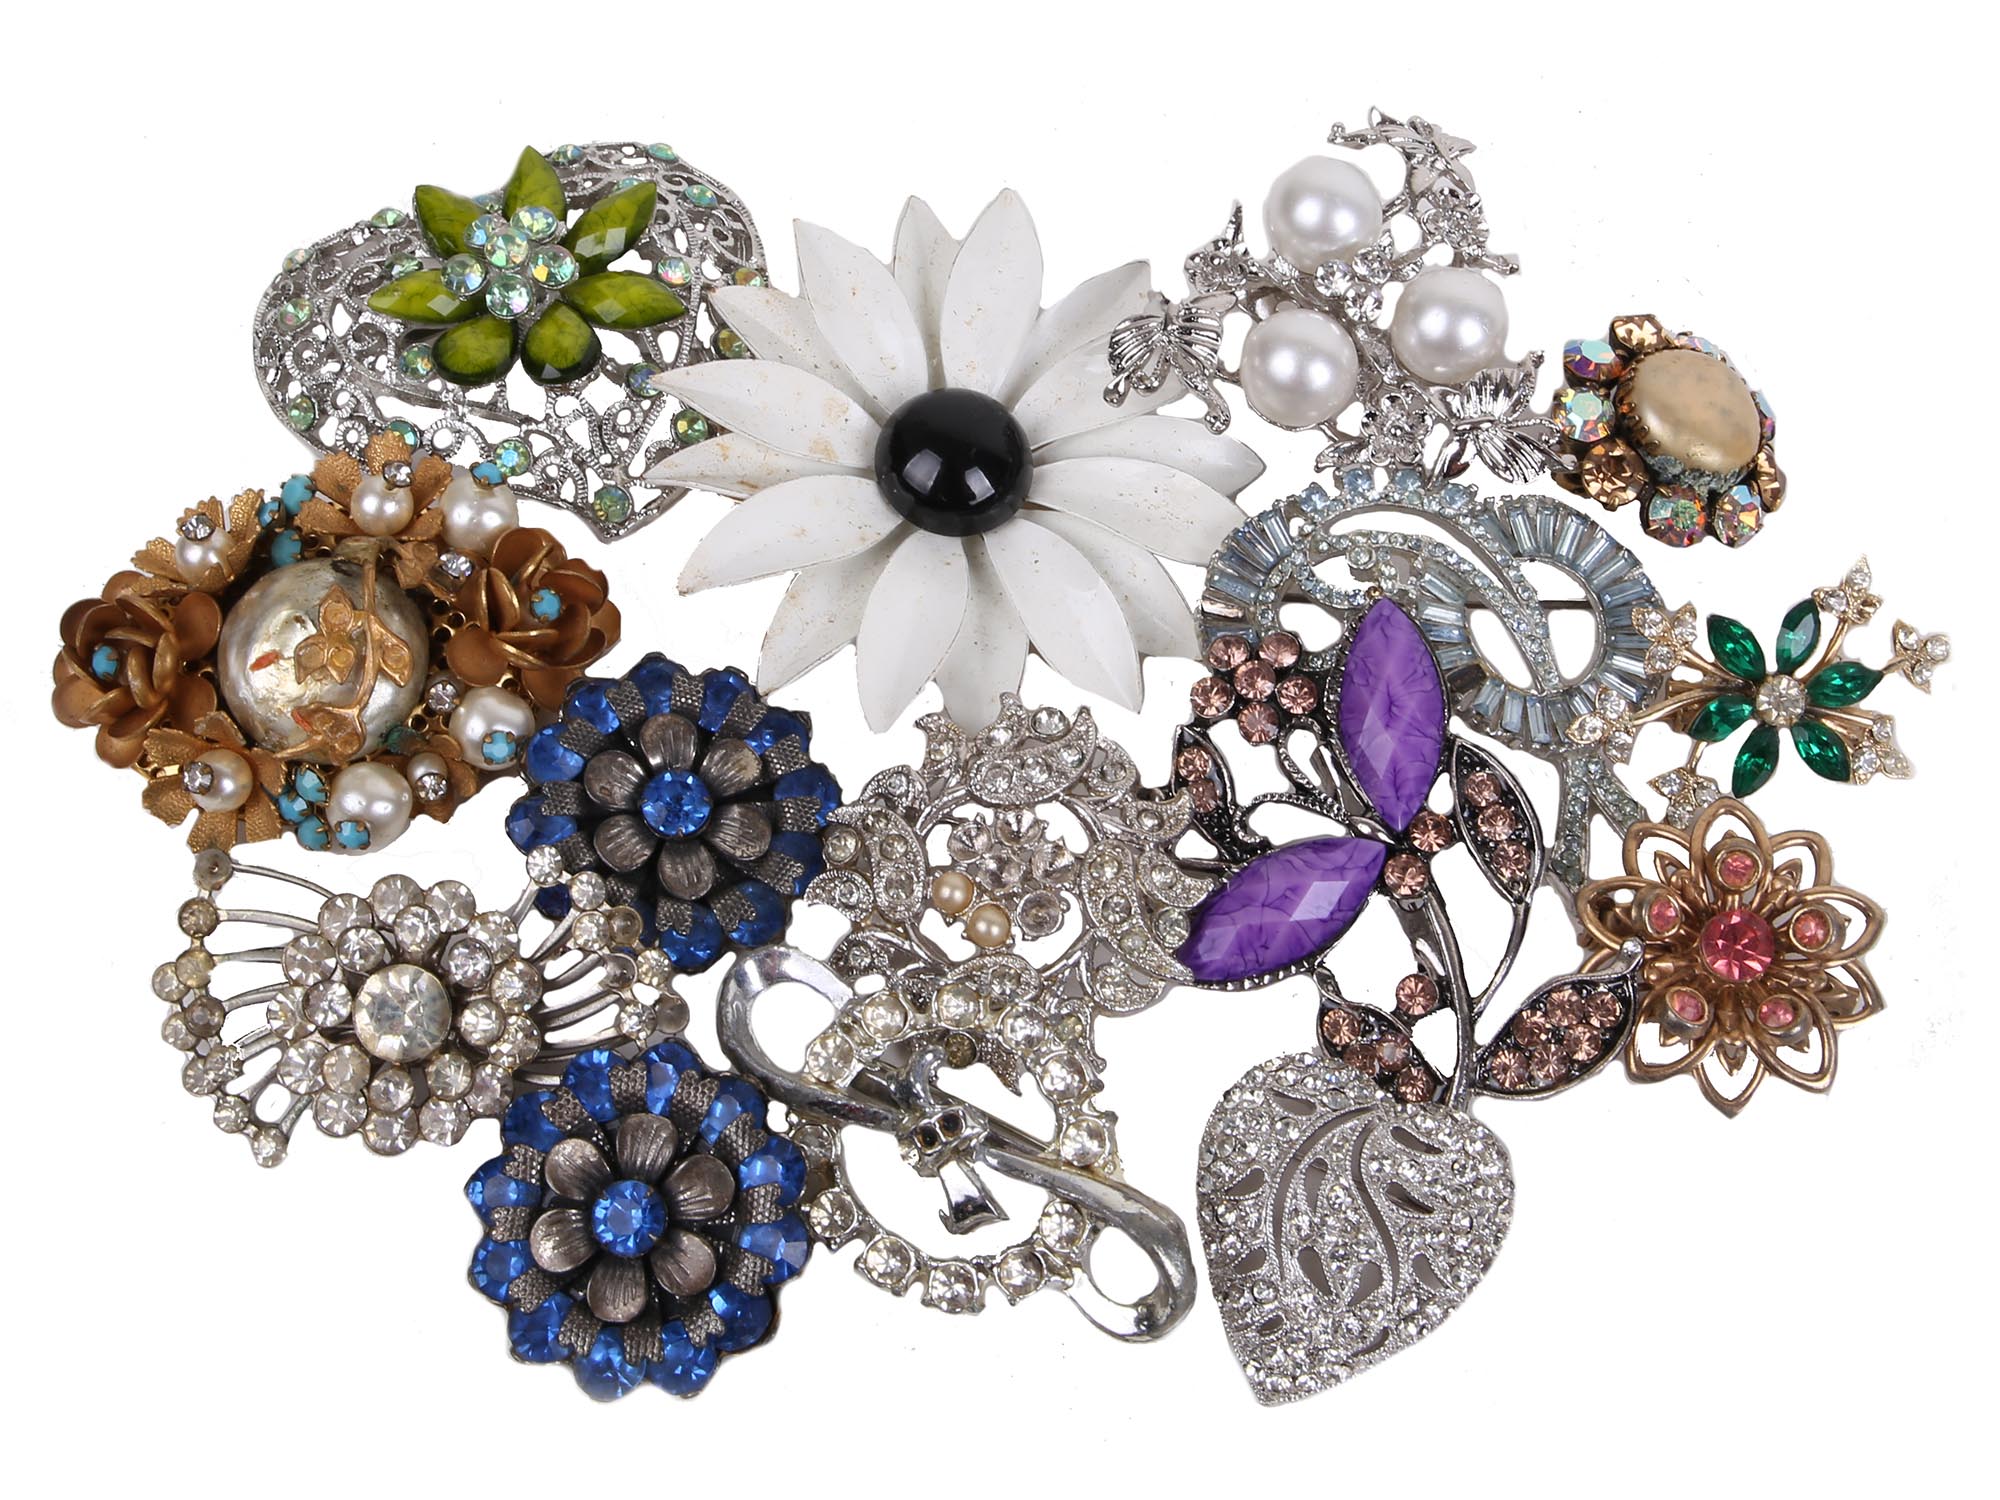 A LARGE COLLECTION OF COLORFUL COSTUME JEWELRY PIC-5